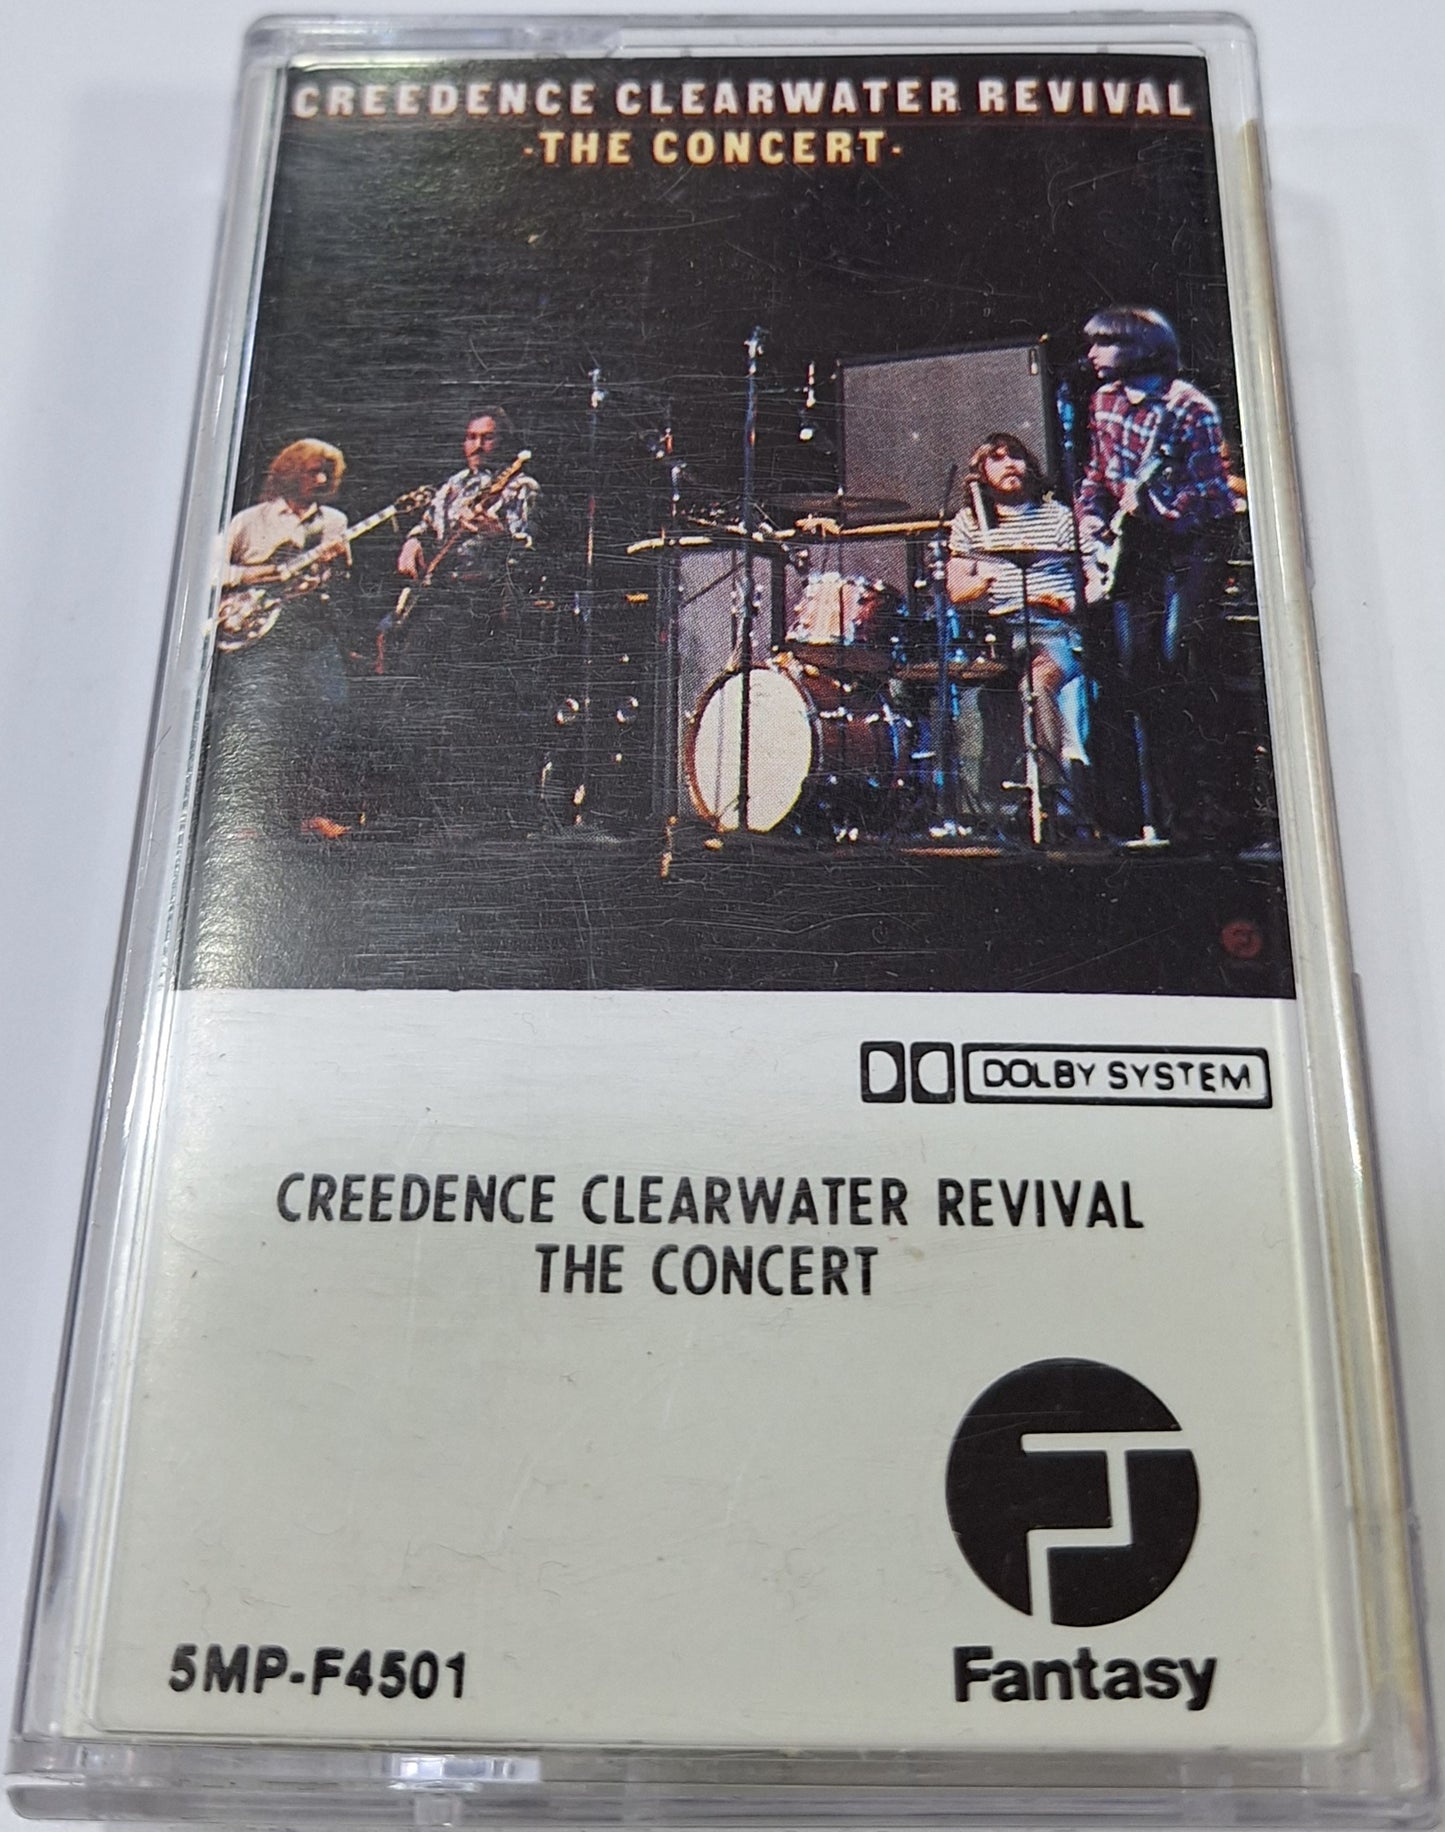 CREEDENCE CLEARWATER REVIVAL - THE CONCERT CASSETTE